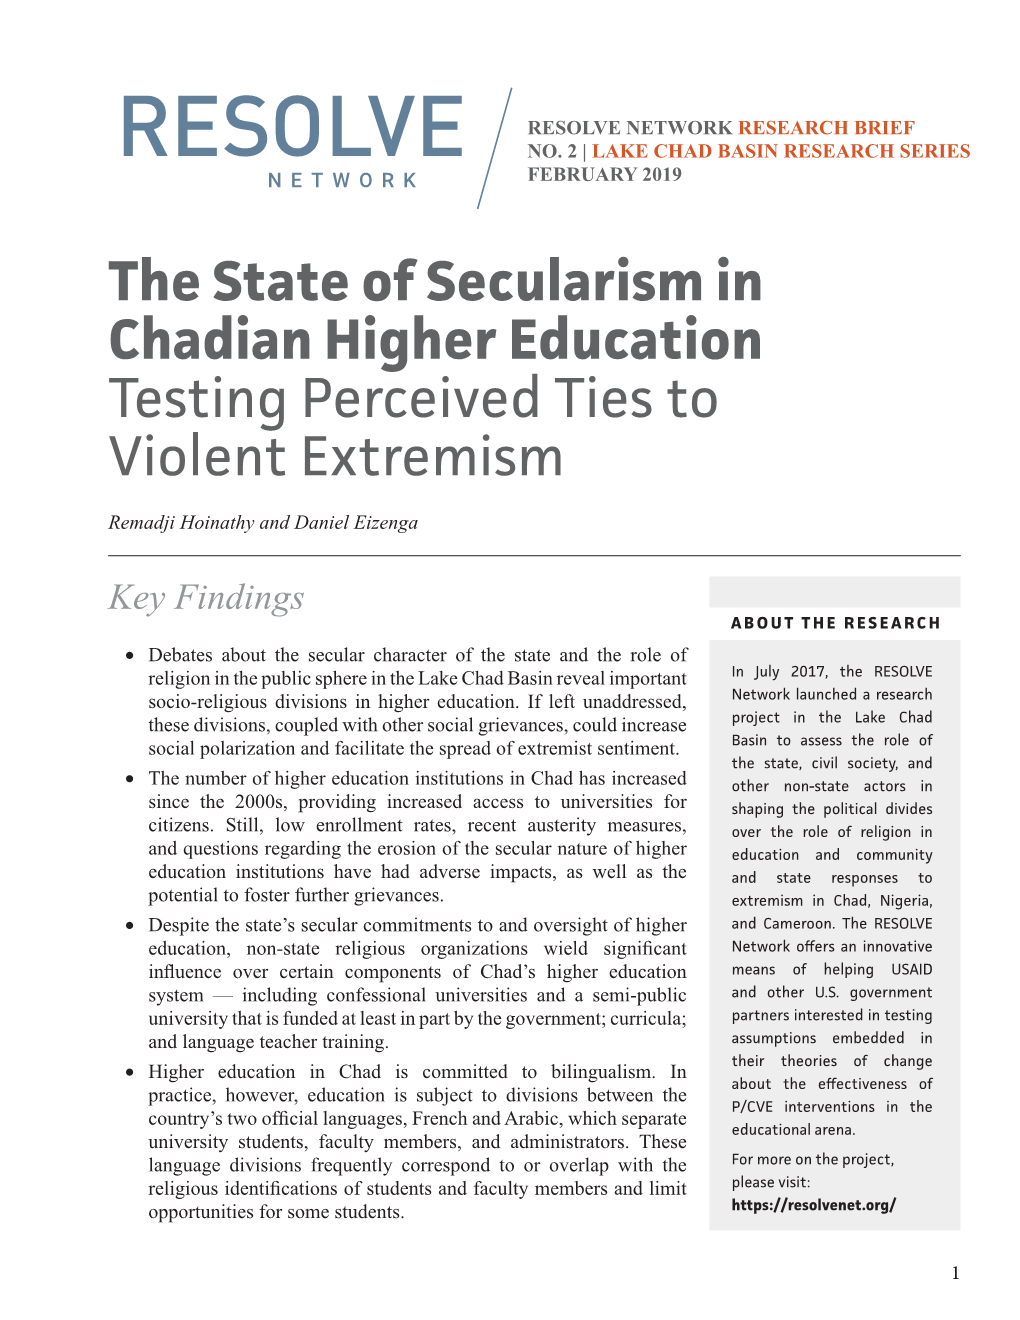 The State of Secularism in Chadian Higher Education Testing Perceived Ties to Violent Extremism